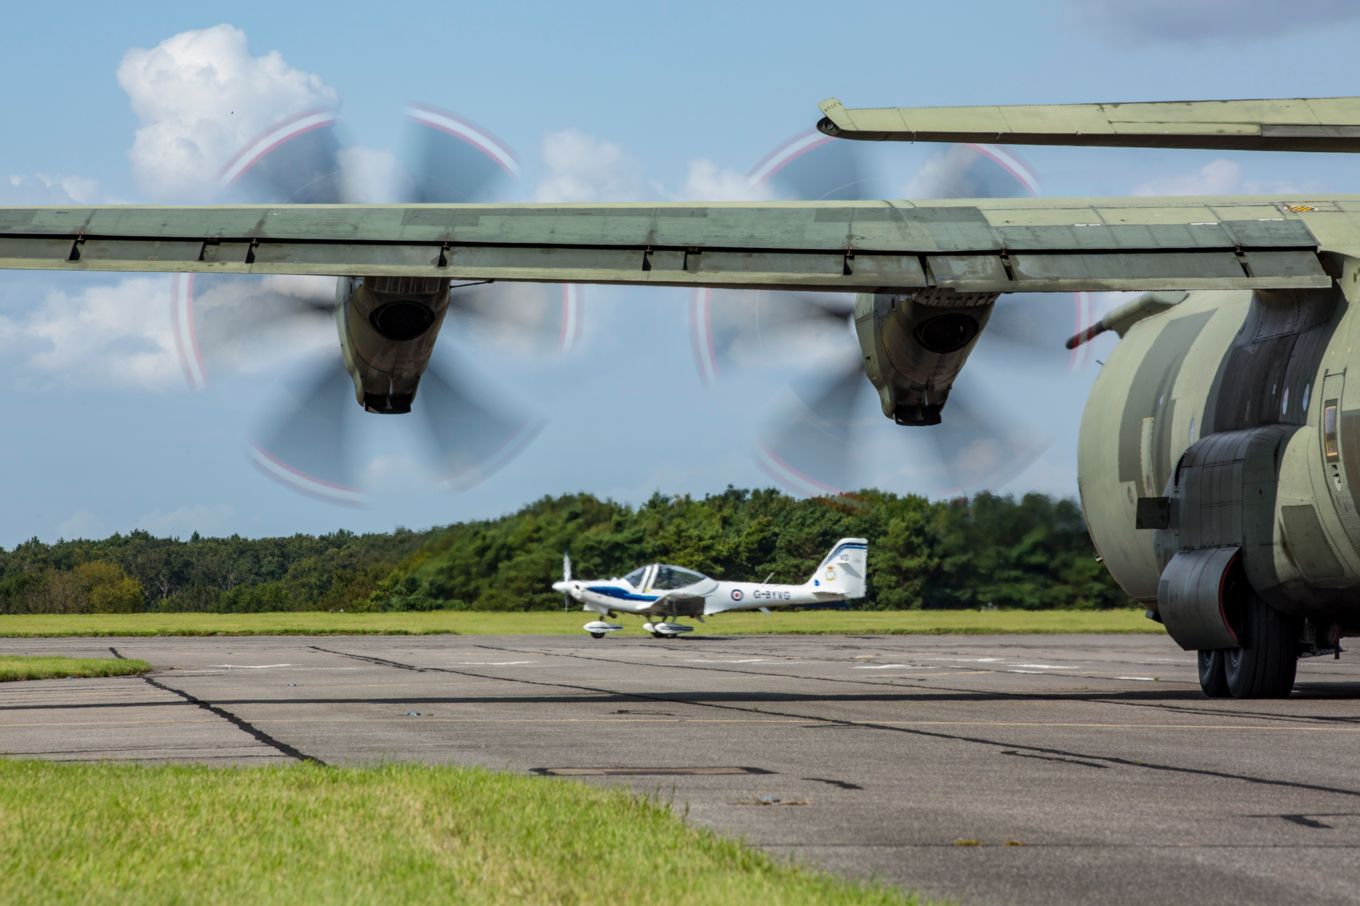 The airfield at RAF Wittering during Exercise Swift Pirate. The image shows an RAF C130 Hercules and a Grob 115E Tutor aircraft